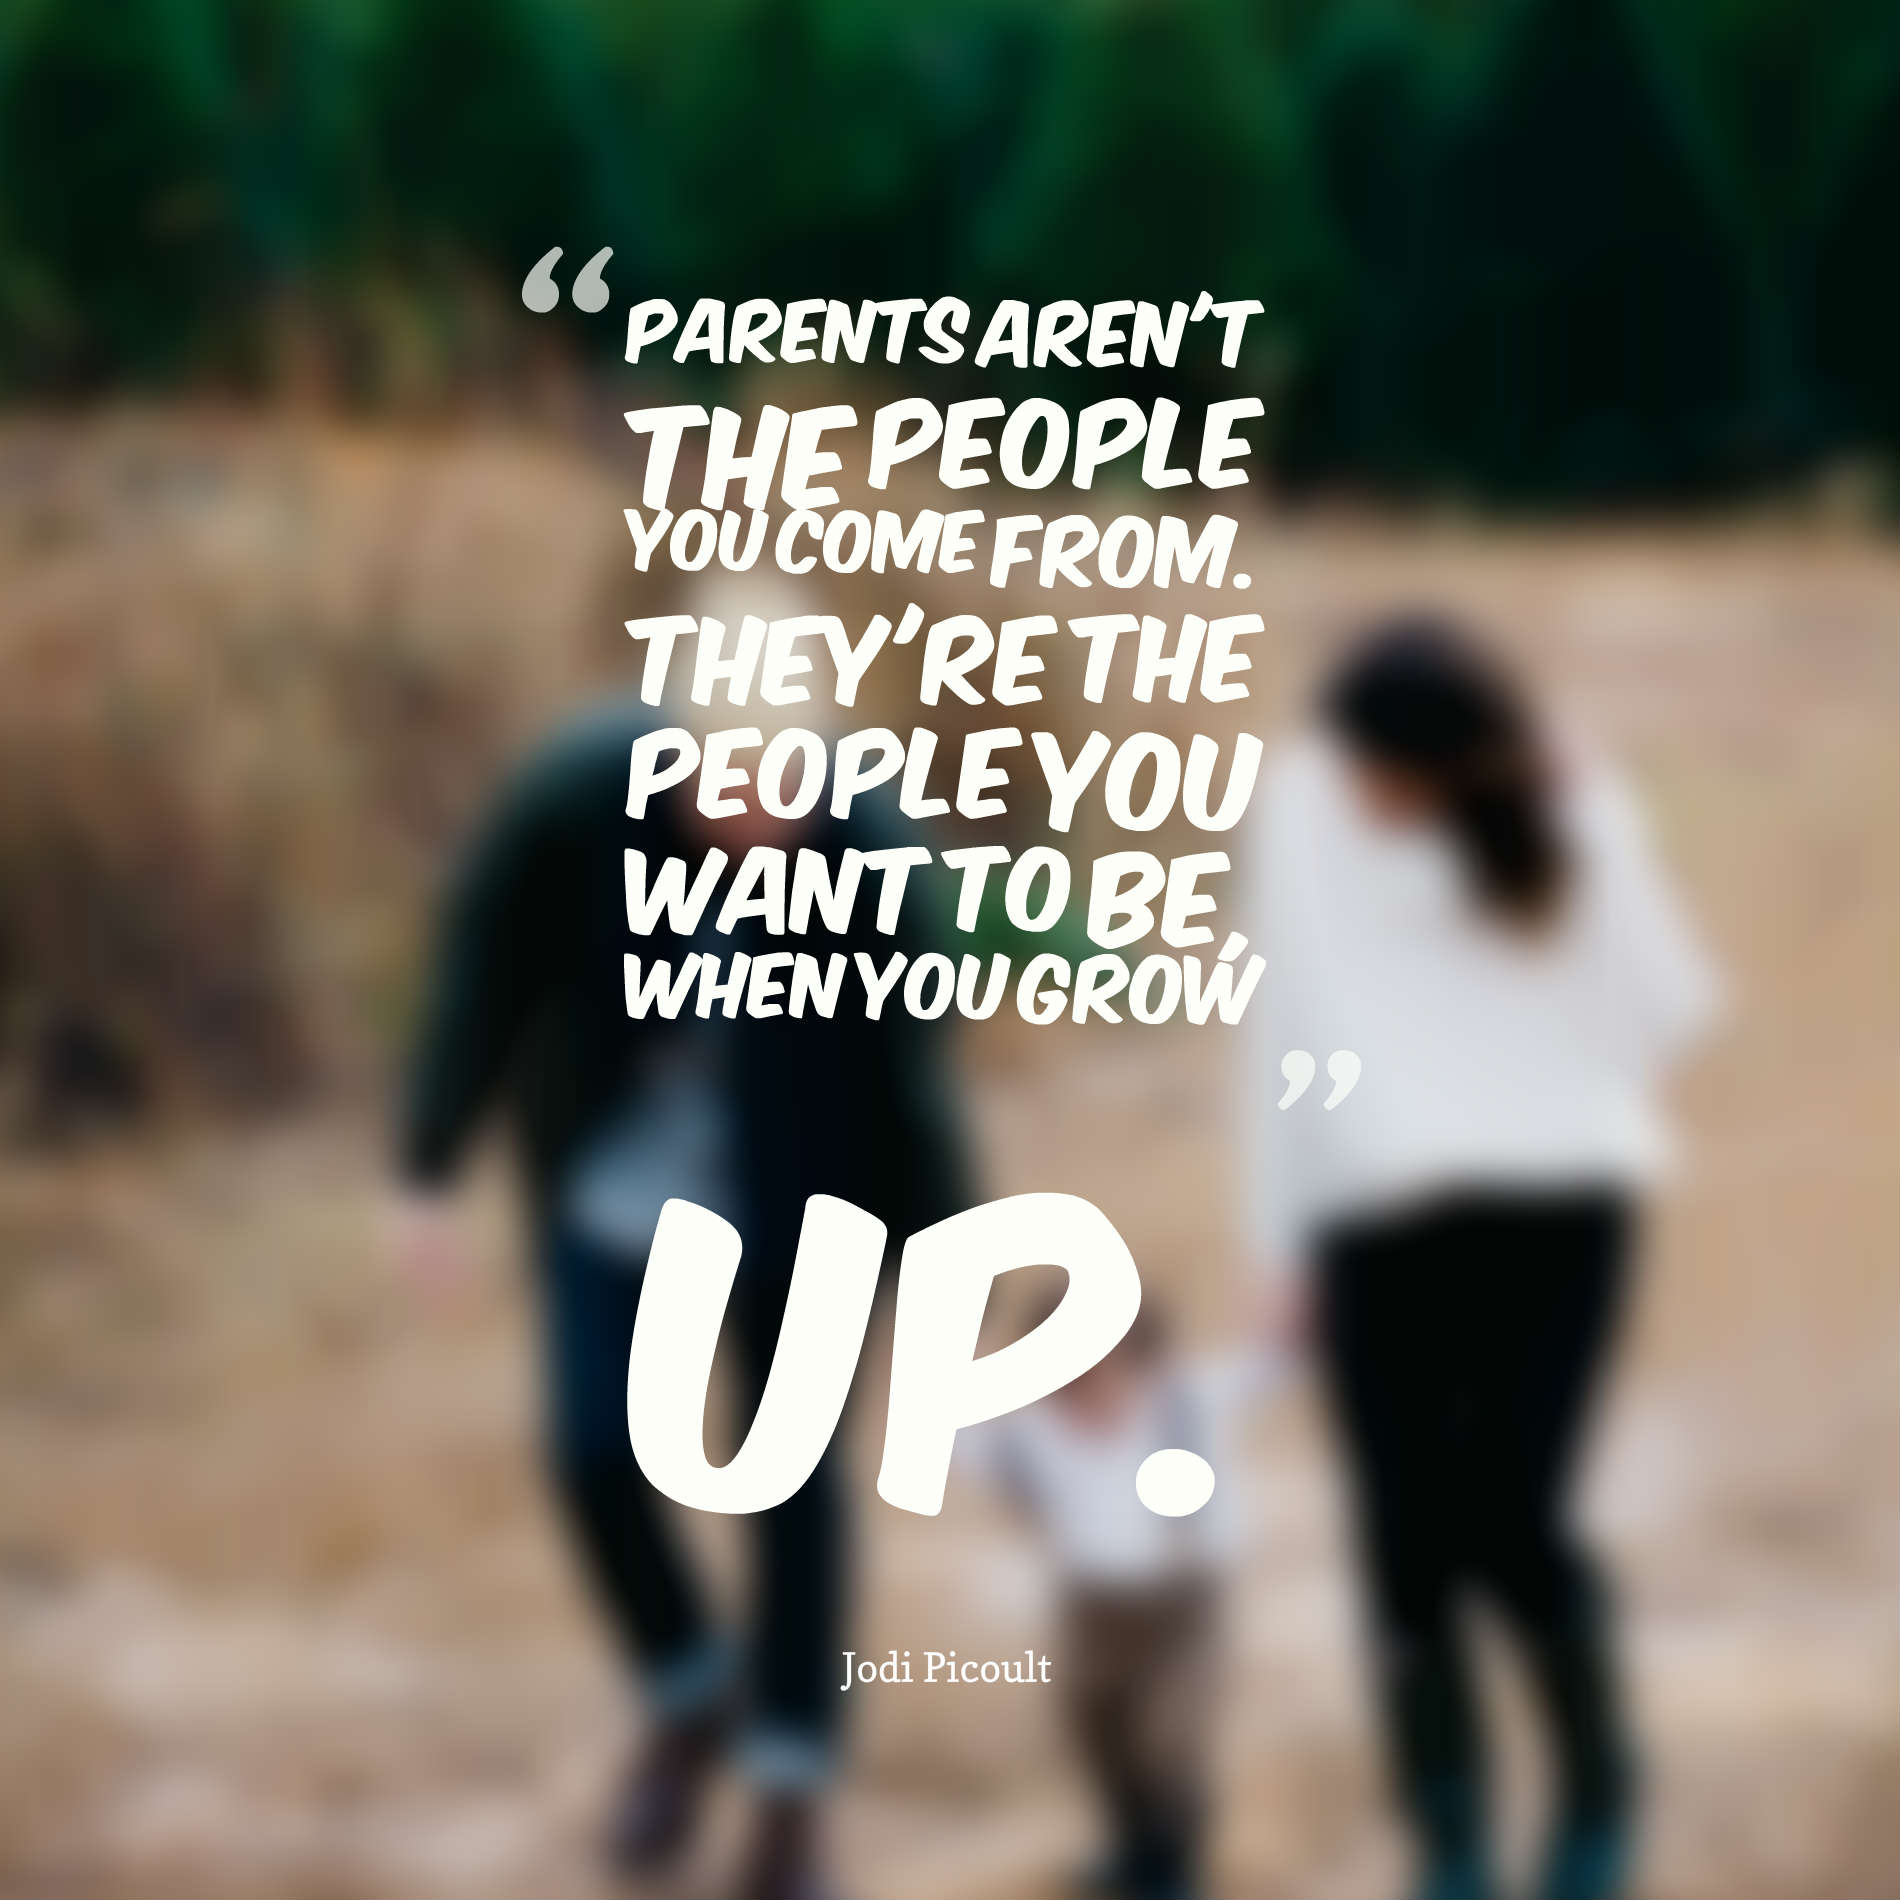 Parents aren't the people you come from. They're the people you want to be, when you grow up.